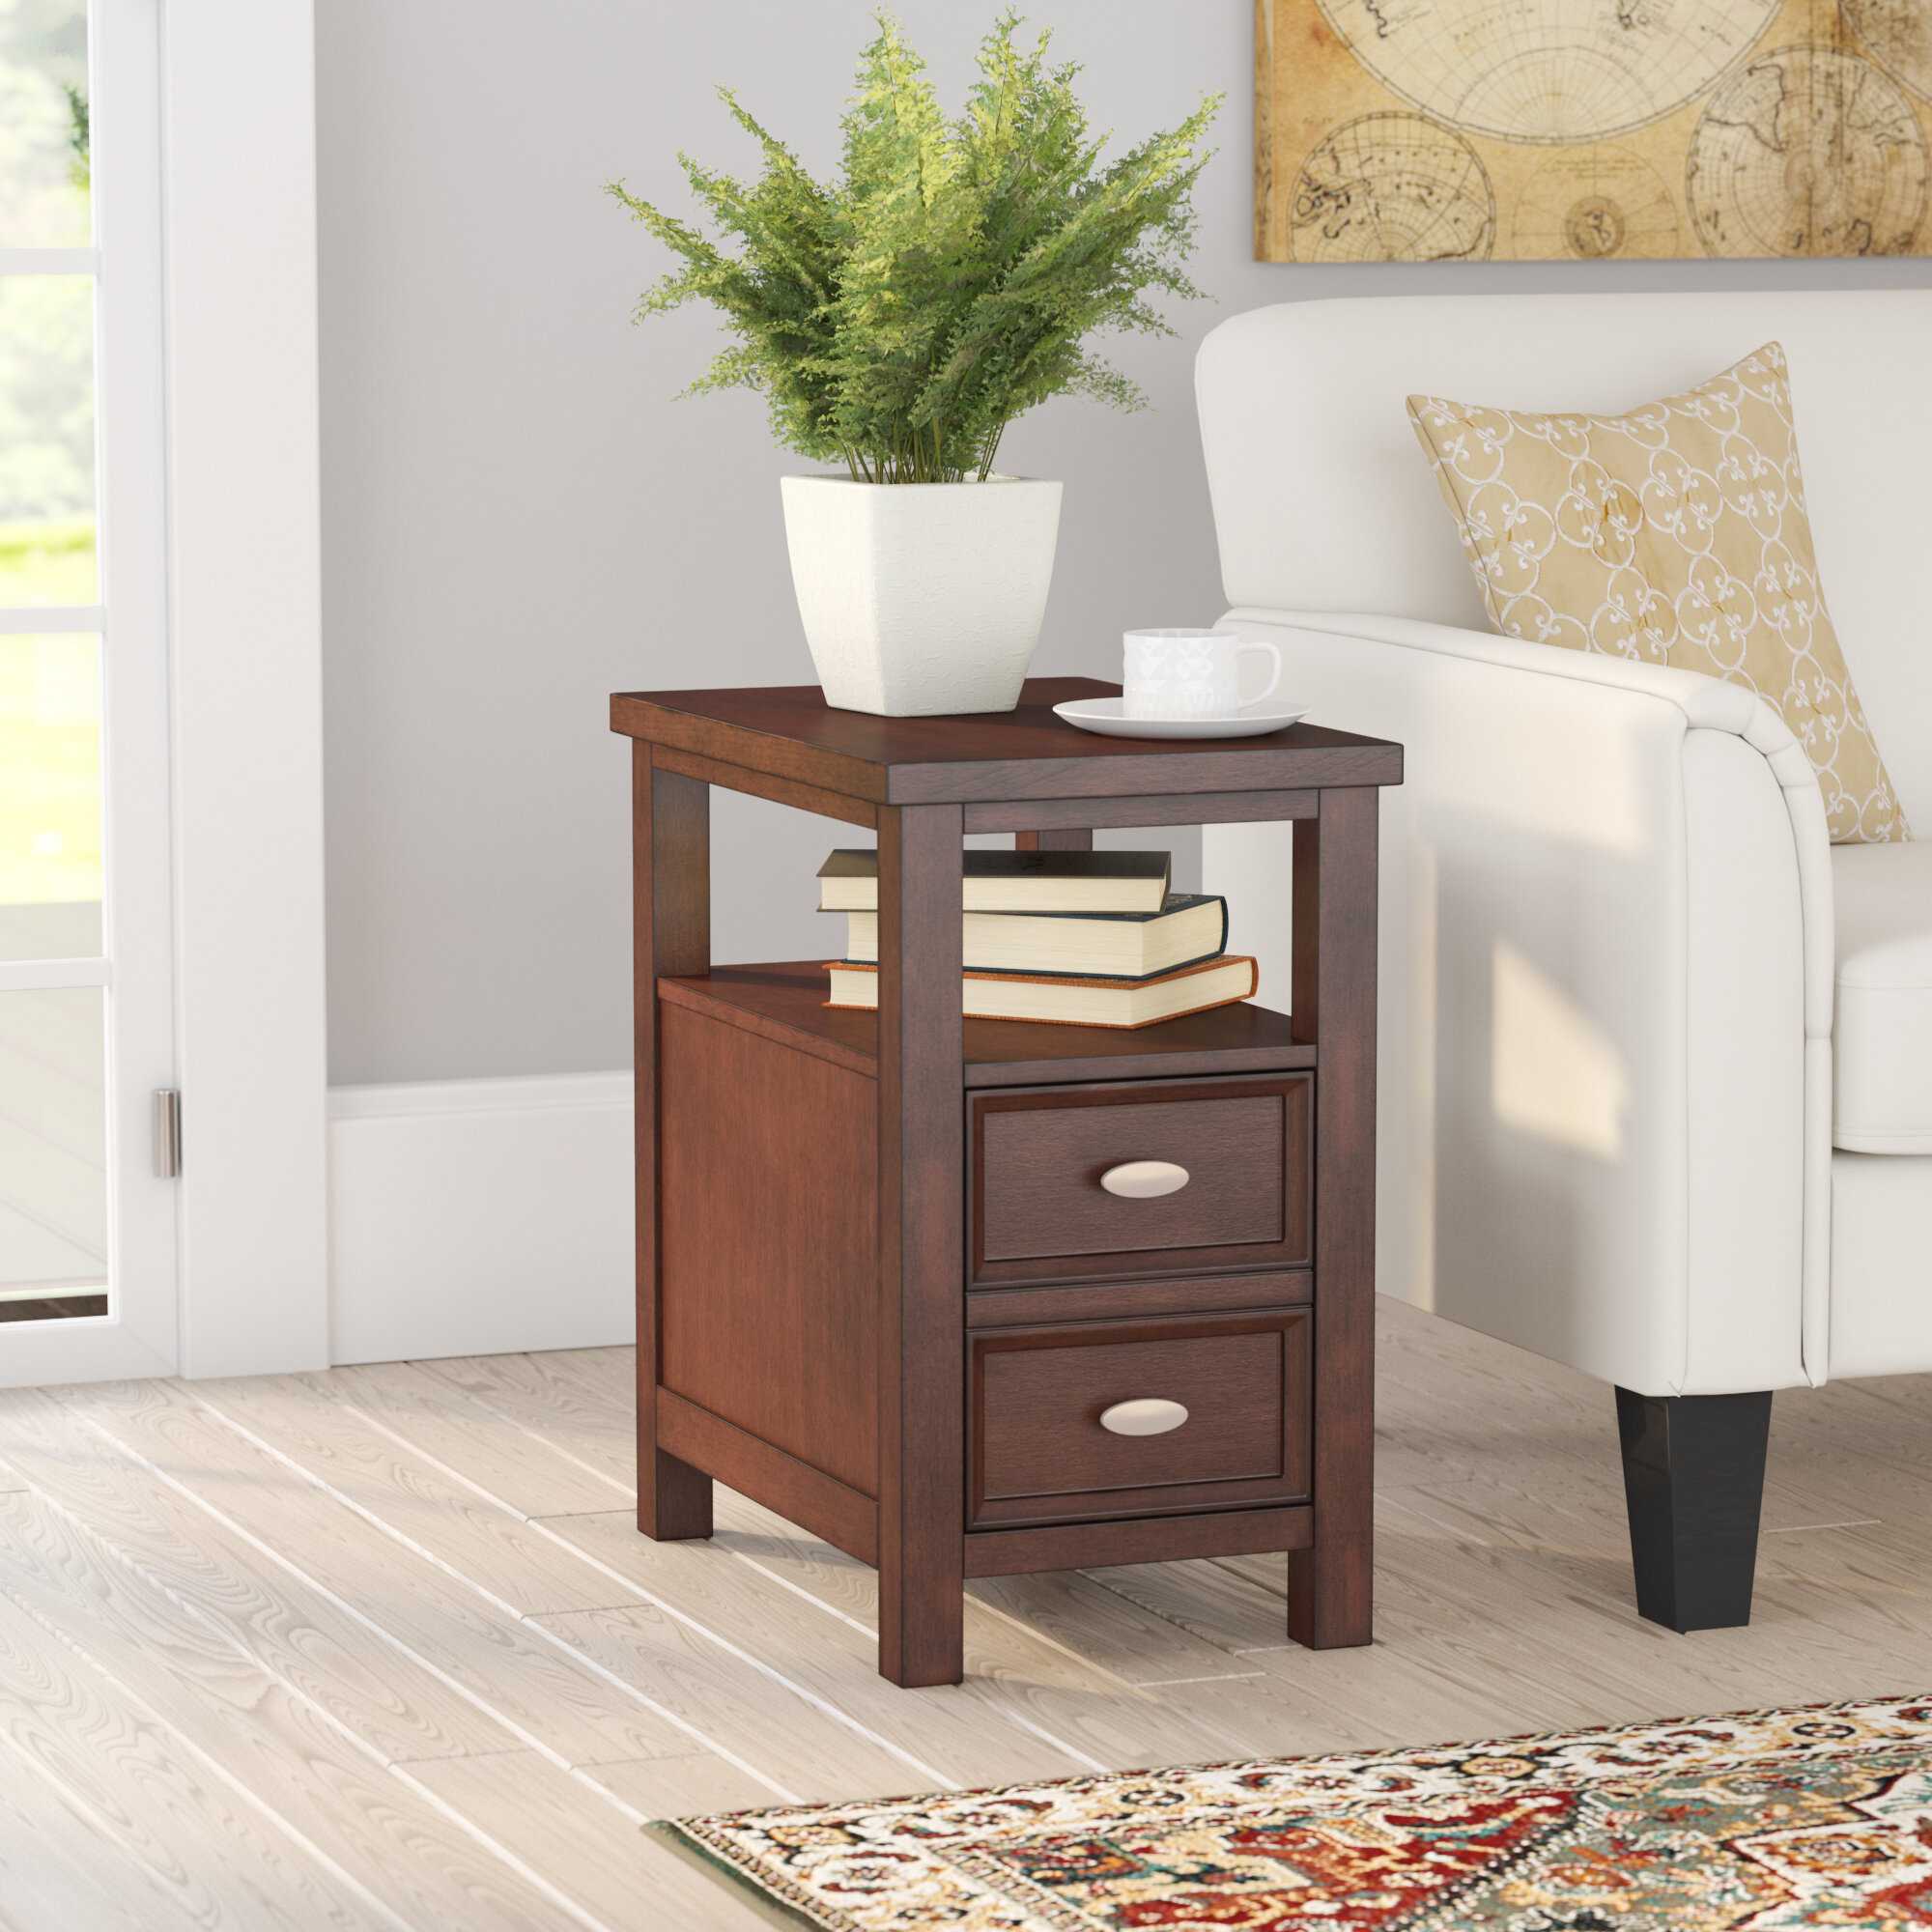 Andover Mills Darius Solid Wood End Table With Storage Reviews